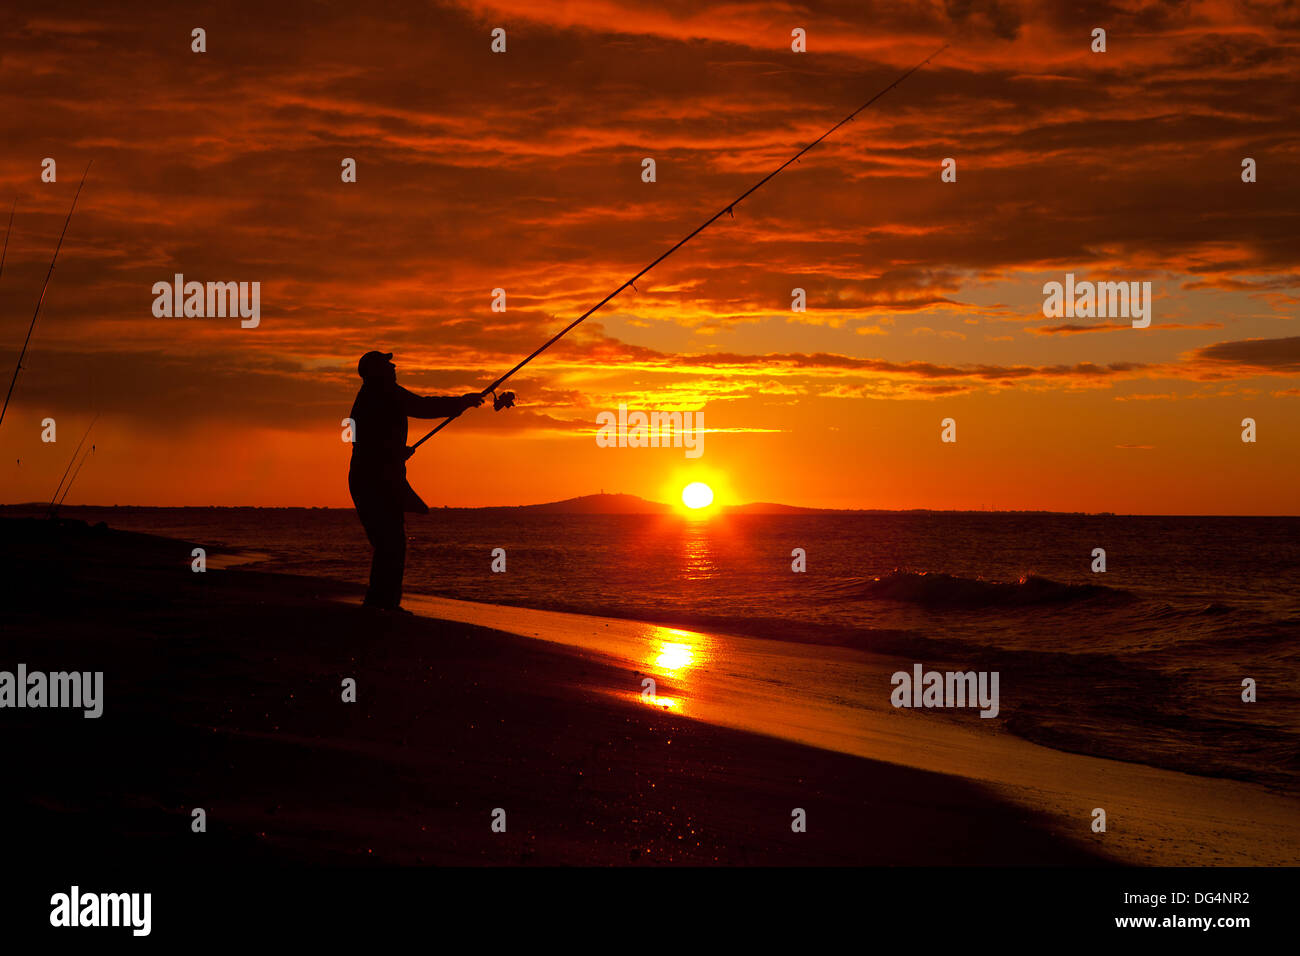 Silhouette Of Fisherman With Sunrise And Big Fish Net In The Background  Stock Photo, Picture and Royalty Free Image. Image 83804102.